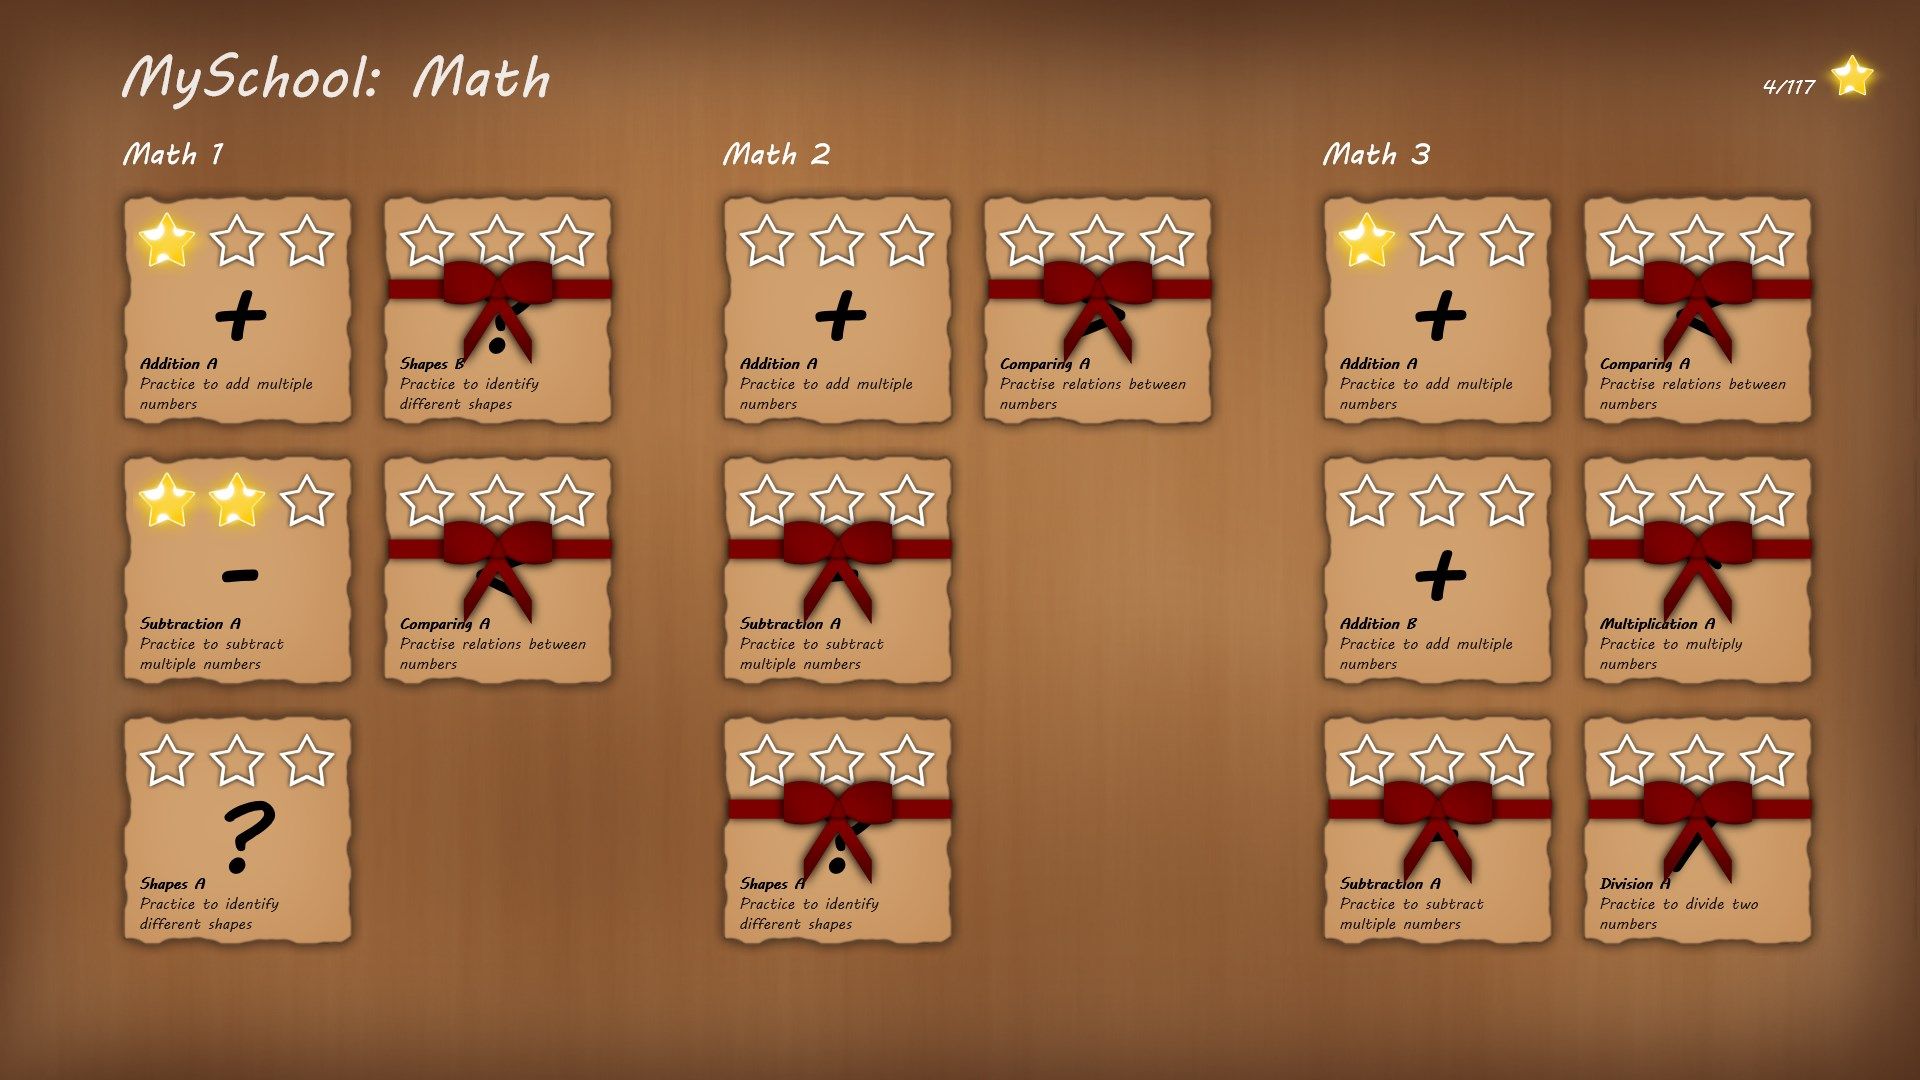 The starting page, containing all the challenges to unlock.